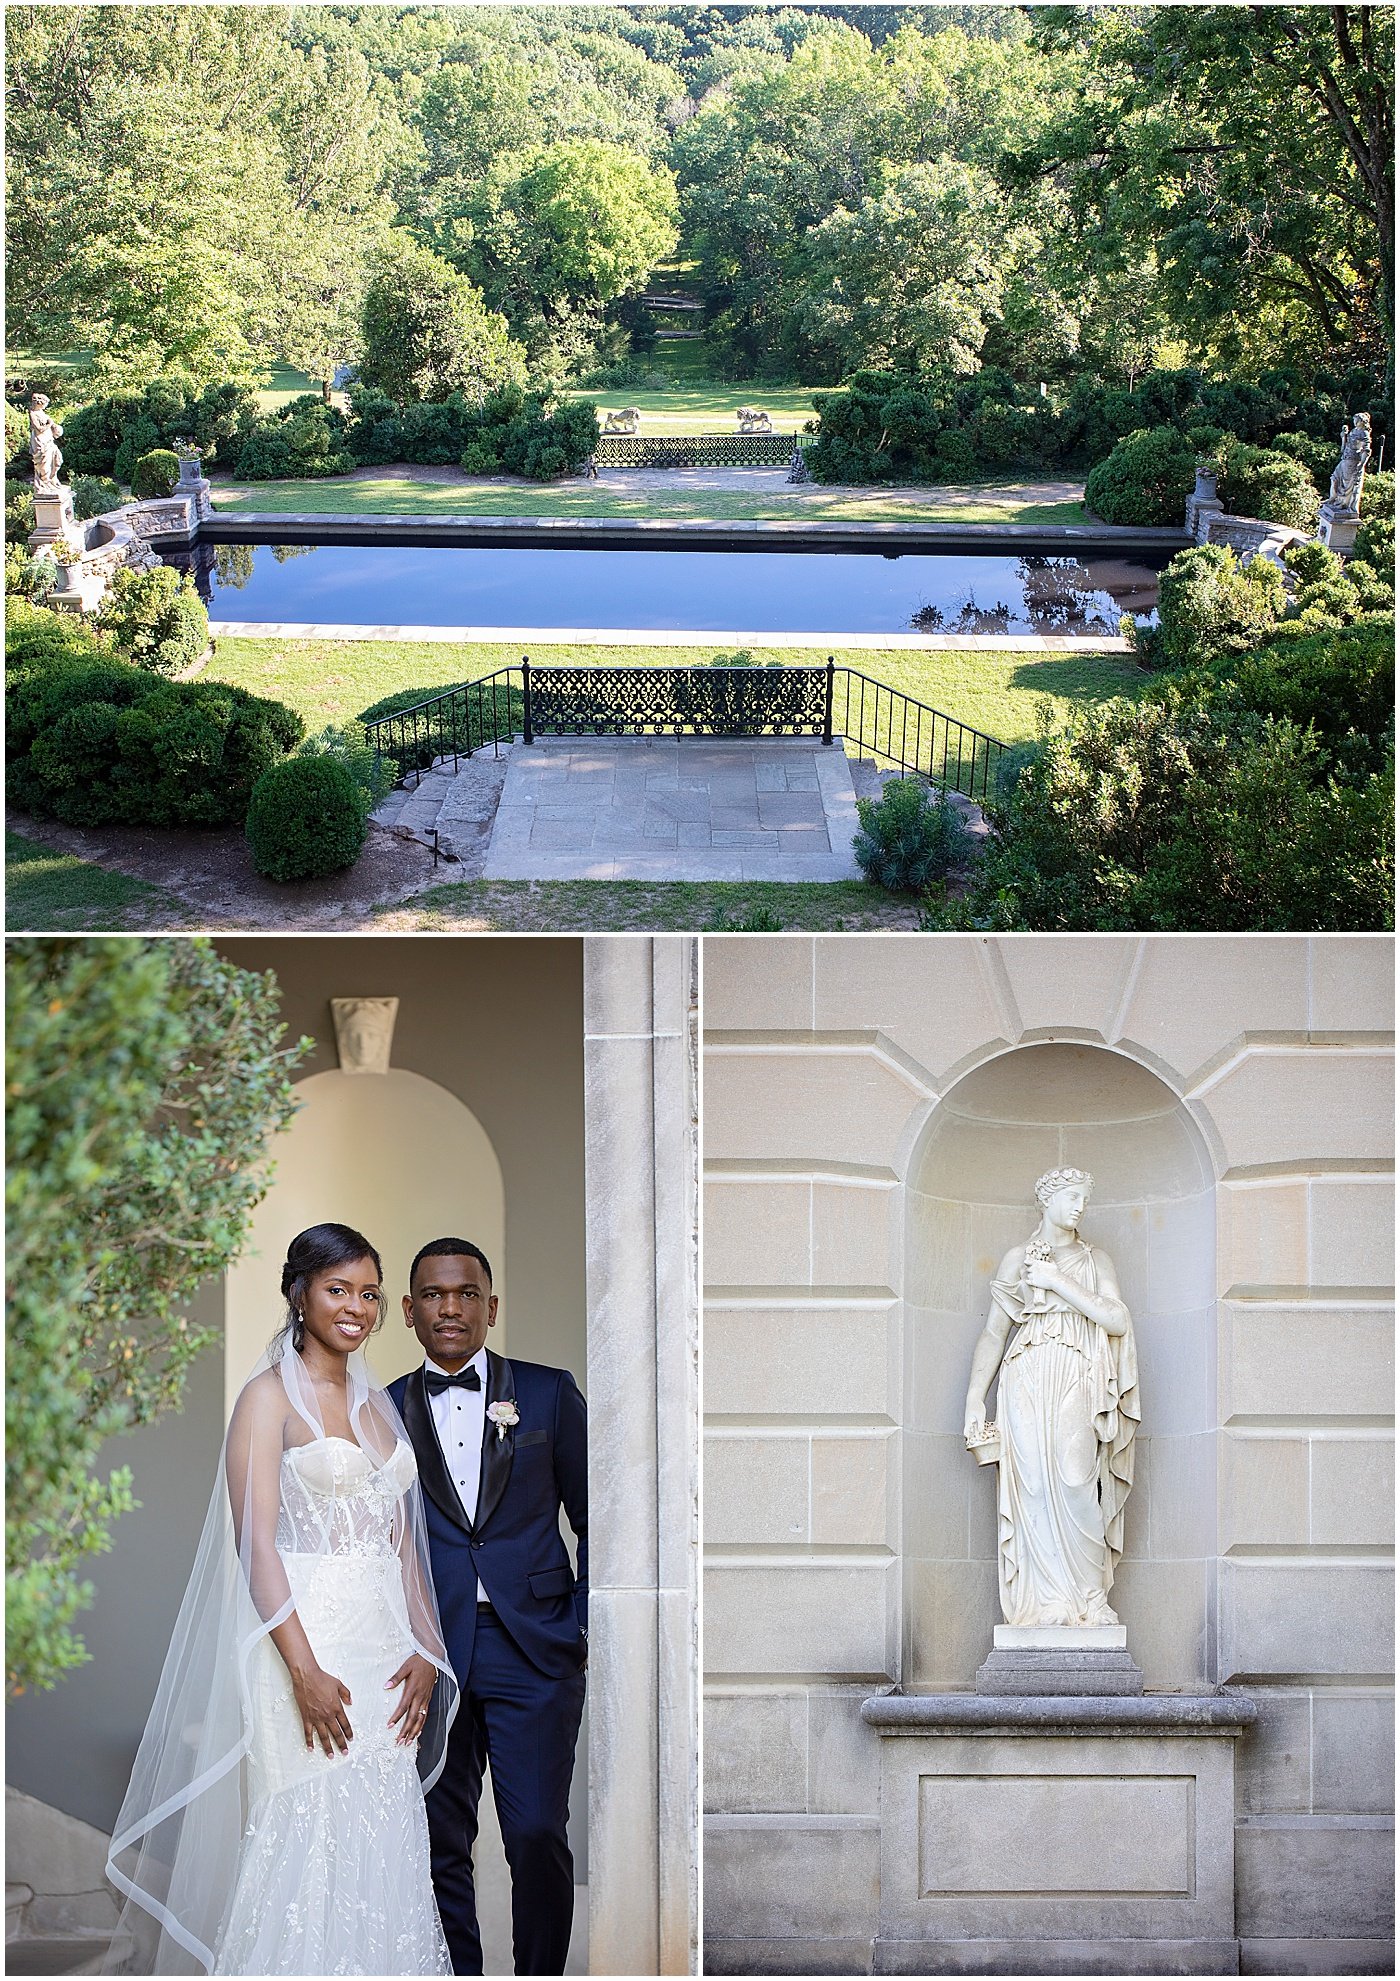 A view of the Reflecting Pool Venue and bride and groom portrait at Cheekwood Estate and Gardens wedding 